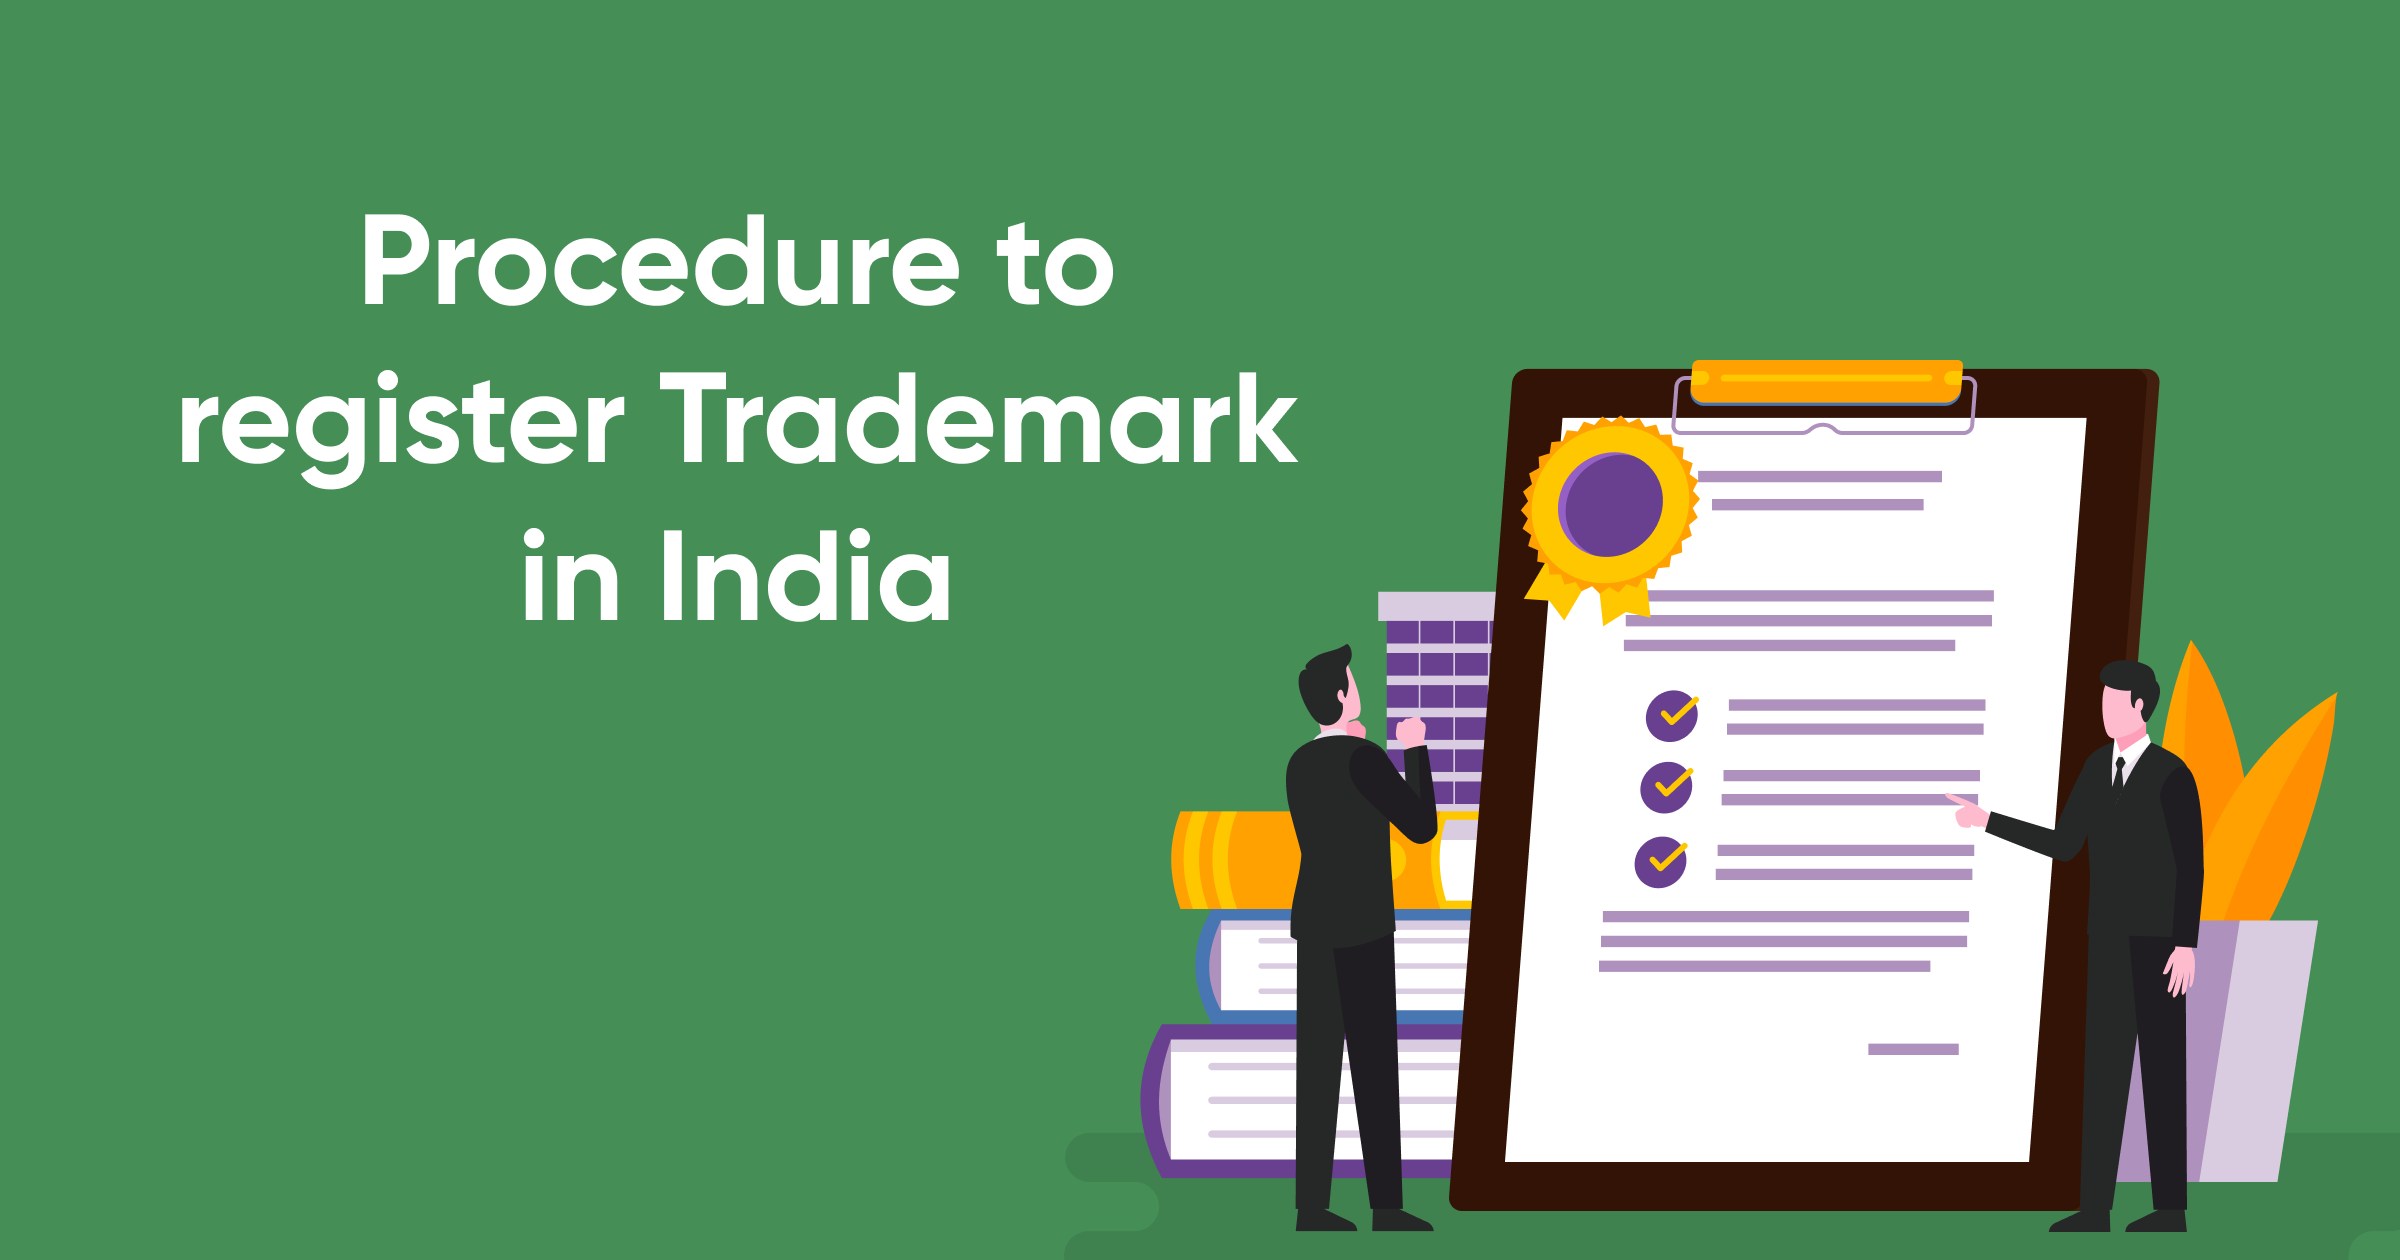 Procedure to Register a Trademark in India